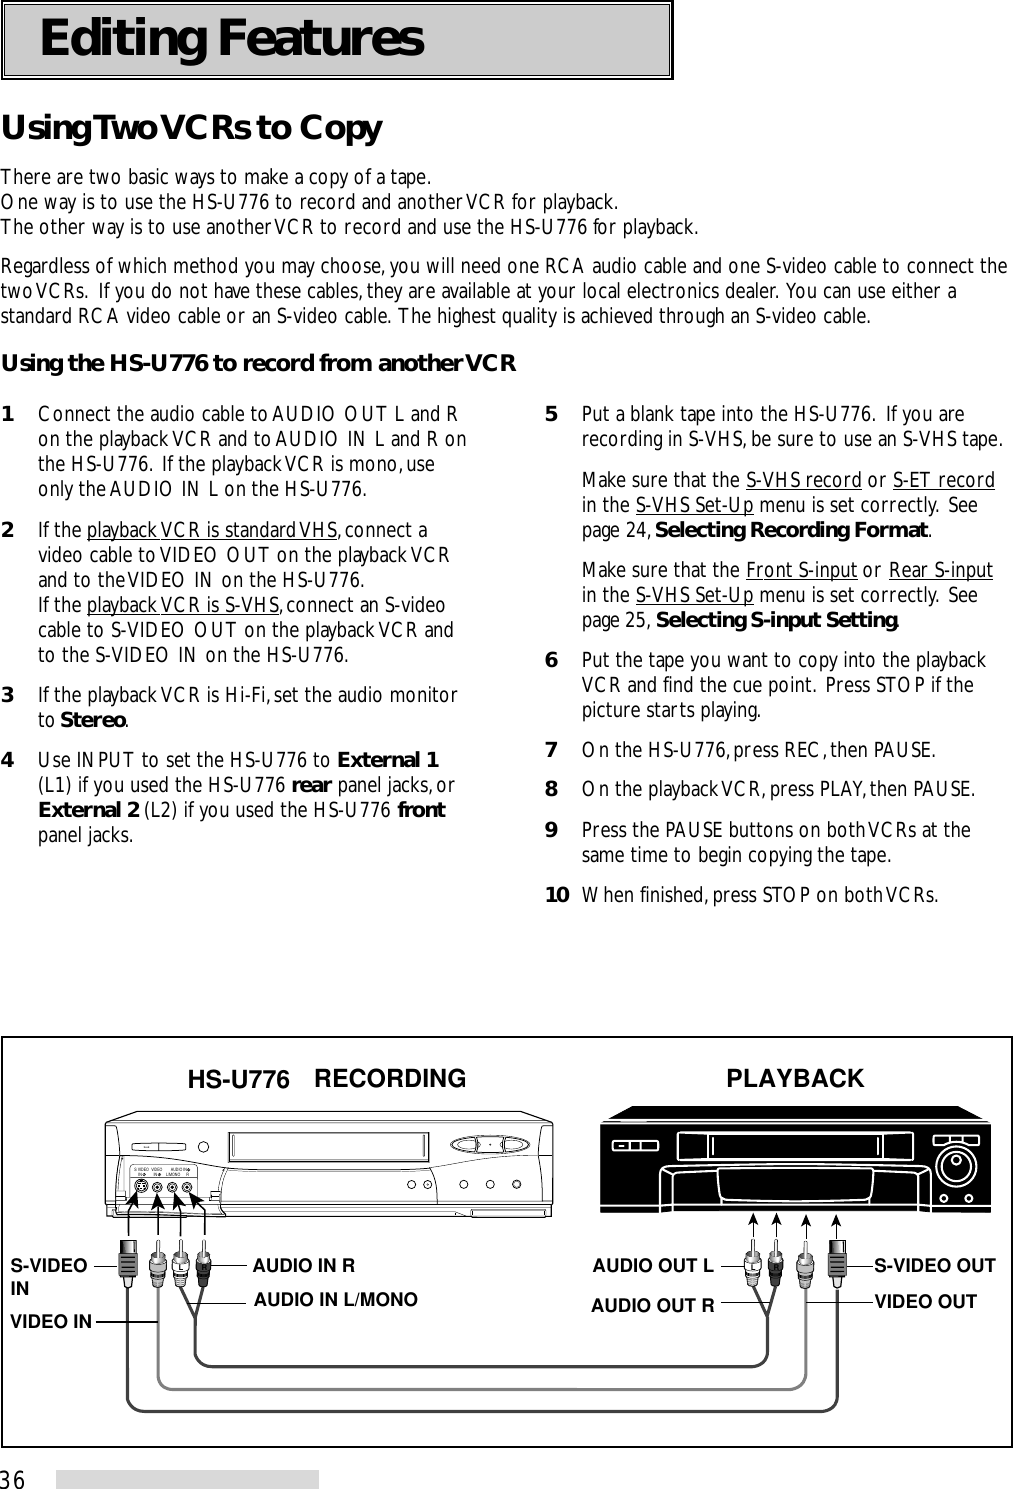 36Editing FeaturesUsing Two VCRs to CopyThere are two basic ways to make a copy of a tape.One way is to use the HS-U776 to record and another VCR for playback.The other way is to use another VCR to record and use the HS-U776 for playback.Regardless of which method you may choose, you will need one RCA audio cable and one S-video cable to connect thetwo VCRs.  If you do not have these cables, they are available at your local electronics dealer.  You can use either astandard RCA video cable or an S-video cable.  The highest quality is achieved through an S-video cable.RVIDEOIN   S VIDEOIN    L/MONOAUDIO INLRLRAUDIO IN RAUDIO IN L/MONO AUDIO OUT LAUDIO OUT R VIDEO OUTS-VIDEO OUTVIDEO INRECORDING PLAYBACKHS-U776S-VIDEO INUsing the HS-U776 to record from another VCR1Connect the audio cable to AUDIO OUT L and Ron the playback VCR and to AUDIO IN L and R onthe HS-U776.  If the playback VCR is mono, useonly the AUDIO IN L on the HS-U776.2If the playback VCR is standard VHS, connect avideo cable to VIDEO OUT on the playback VCRand to the VIDEO IN on the HS-U776.If the playback VCR is S-VHS, connect an S-videocable to S-VIDEO OUT on the playback VCR andto the S-VIDEO IN on the HS-U776.3If the playback VCR is Hi-Fi, set the audio monitorto Stereo.4Use INPUT to set the HS-U776 to External 1(L1) if you used the HS-U776 rear panel jacks, orExternal 2 (L2) if you used the HS-U776 frontpanel jacks.5Put a blank tape into the HS-U776.  If you arerecording in S-VHS, be sure to use an S-VHS tape.Make sure that the S-VHS record or S-ET recordin the S-VHS Set-Up menu is set correctly.  Seepage 24, Selecting Recording Format.Make sure that the Front S-input or Rear S-inputin the S-VHS Set-Up menu is set correctly.  Seepage 25, Selecting S-input Setting.6Put the tape you want to copy into the playbackVCR and find the cue point.  Press STOP if thepicture starts playing.7On the HS-U776, press REC, then PAUSE.8On the playback VCR, press PLAY, then PAUSE.9Press the PAUSE buttons on both VCRs at thesame time to begin copying the tape.10 When finished, press STOP on both VCRs.